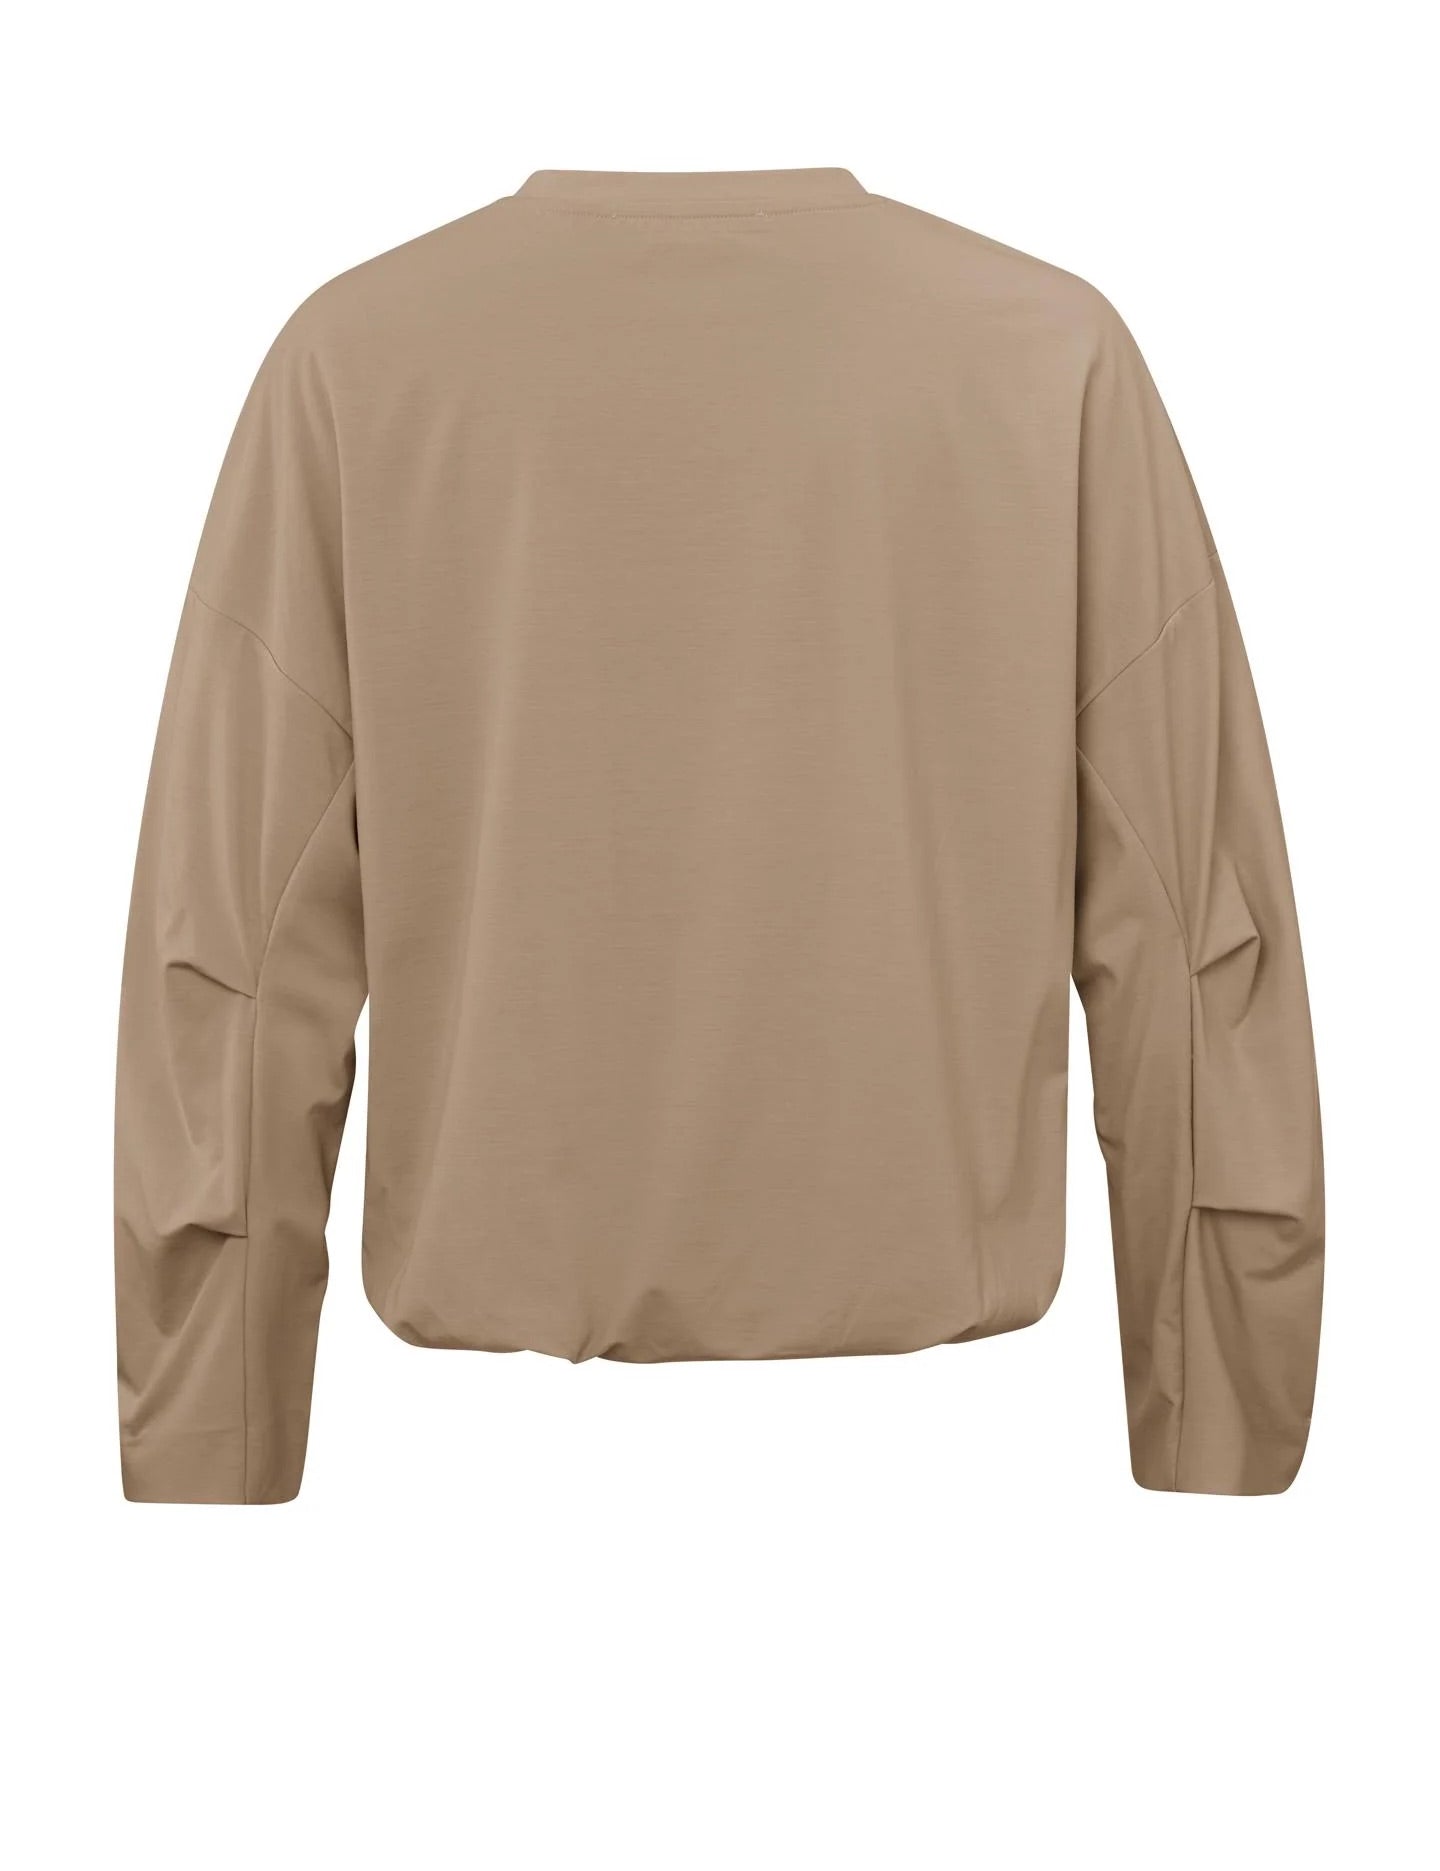 top-with-crewneck-long-sleeves-and-pleated-details-affogato-brown_2880x_jpg.jpg